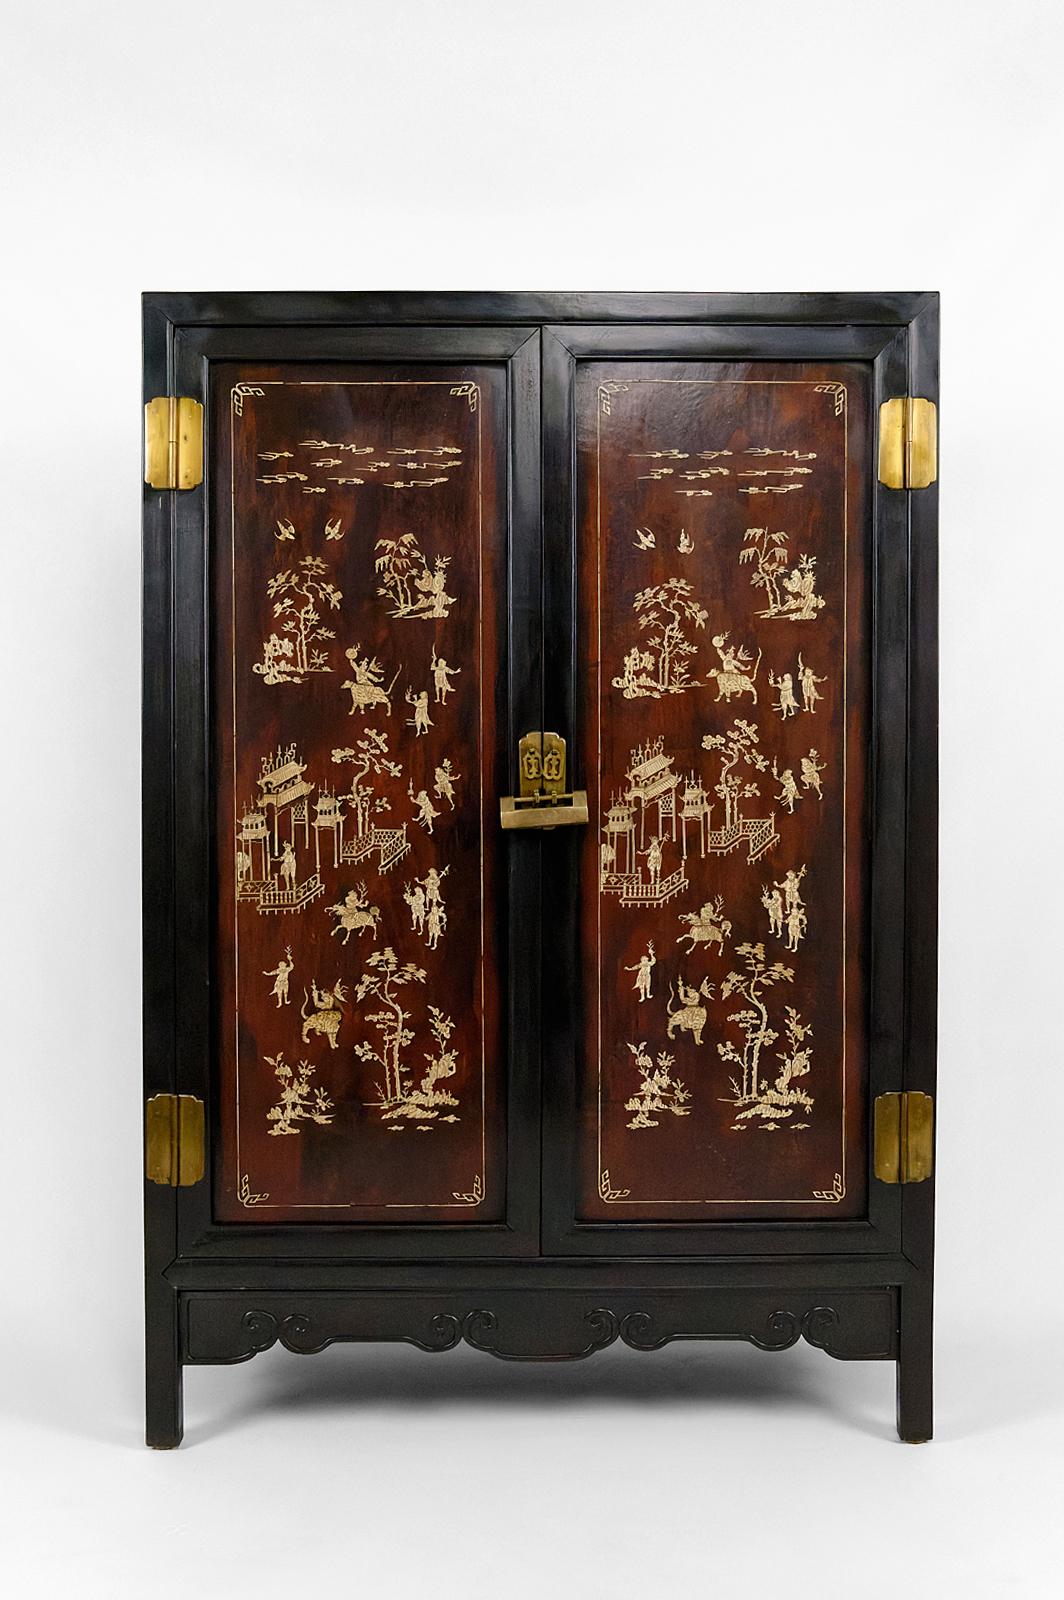 Indochina or south china.
Circa 1880-1900
Brass hinges, handles and padlocks
Double door cabinet with two shelves
Pretty marquetry: vegetation, birds, mythological creatures / deities riding tigers and kirins.
Good general condition, some gaps in